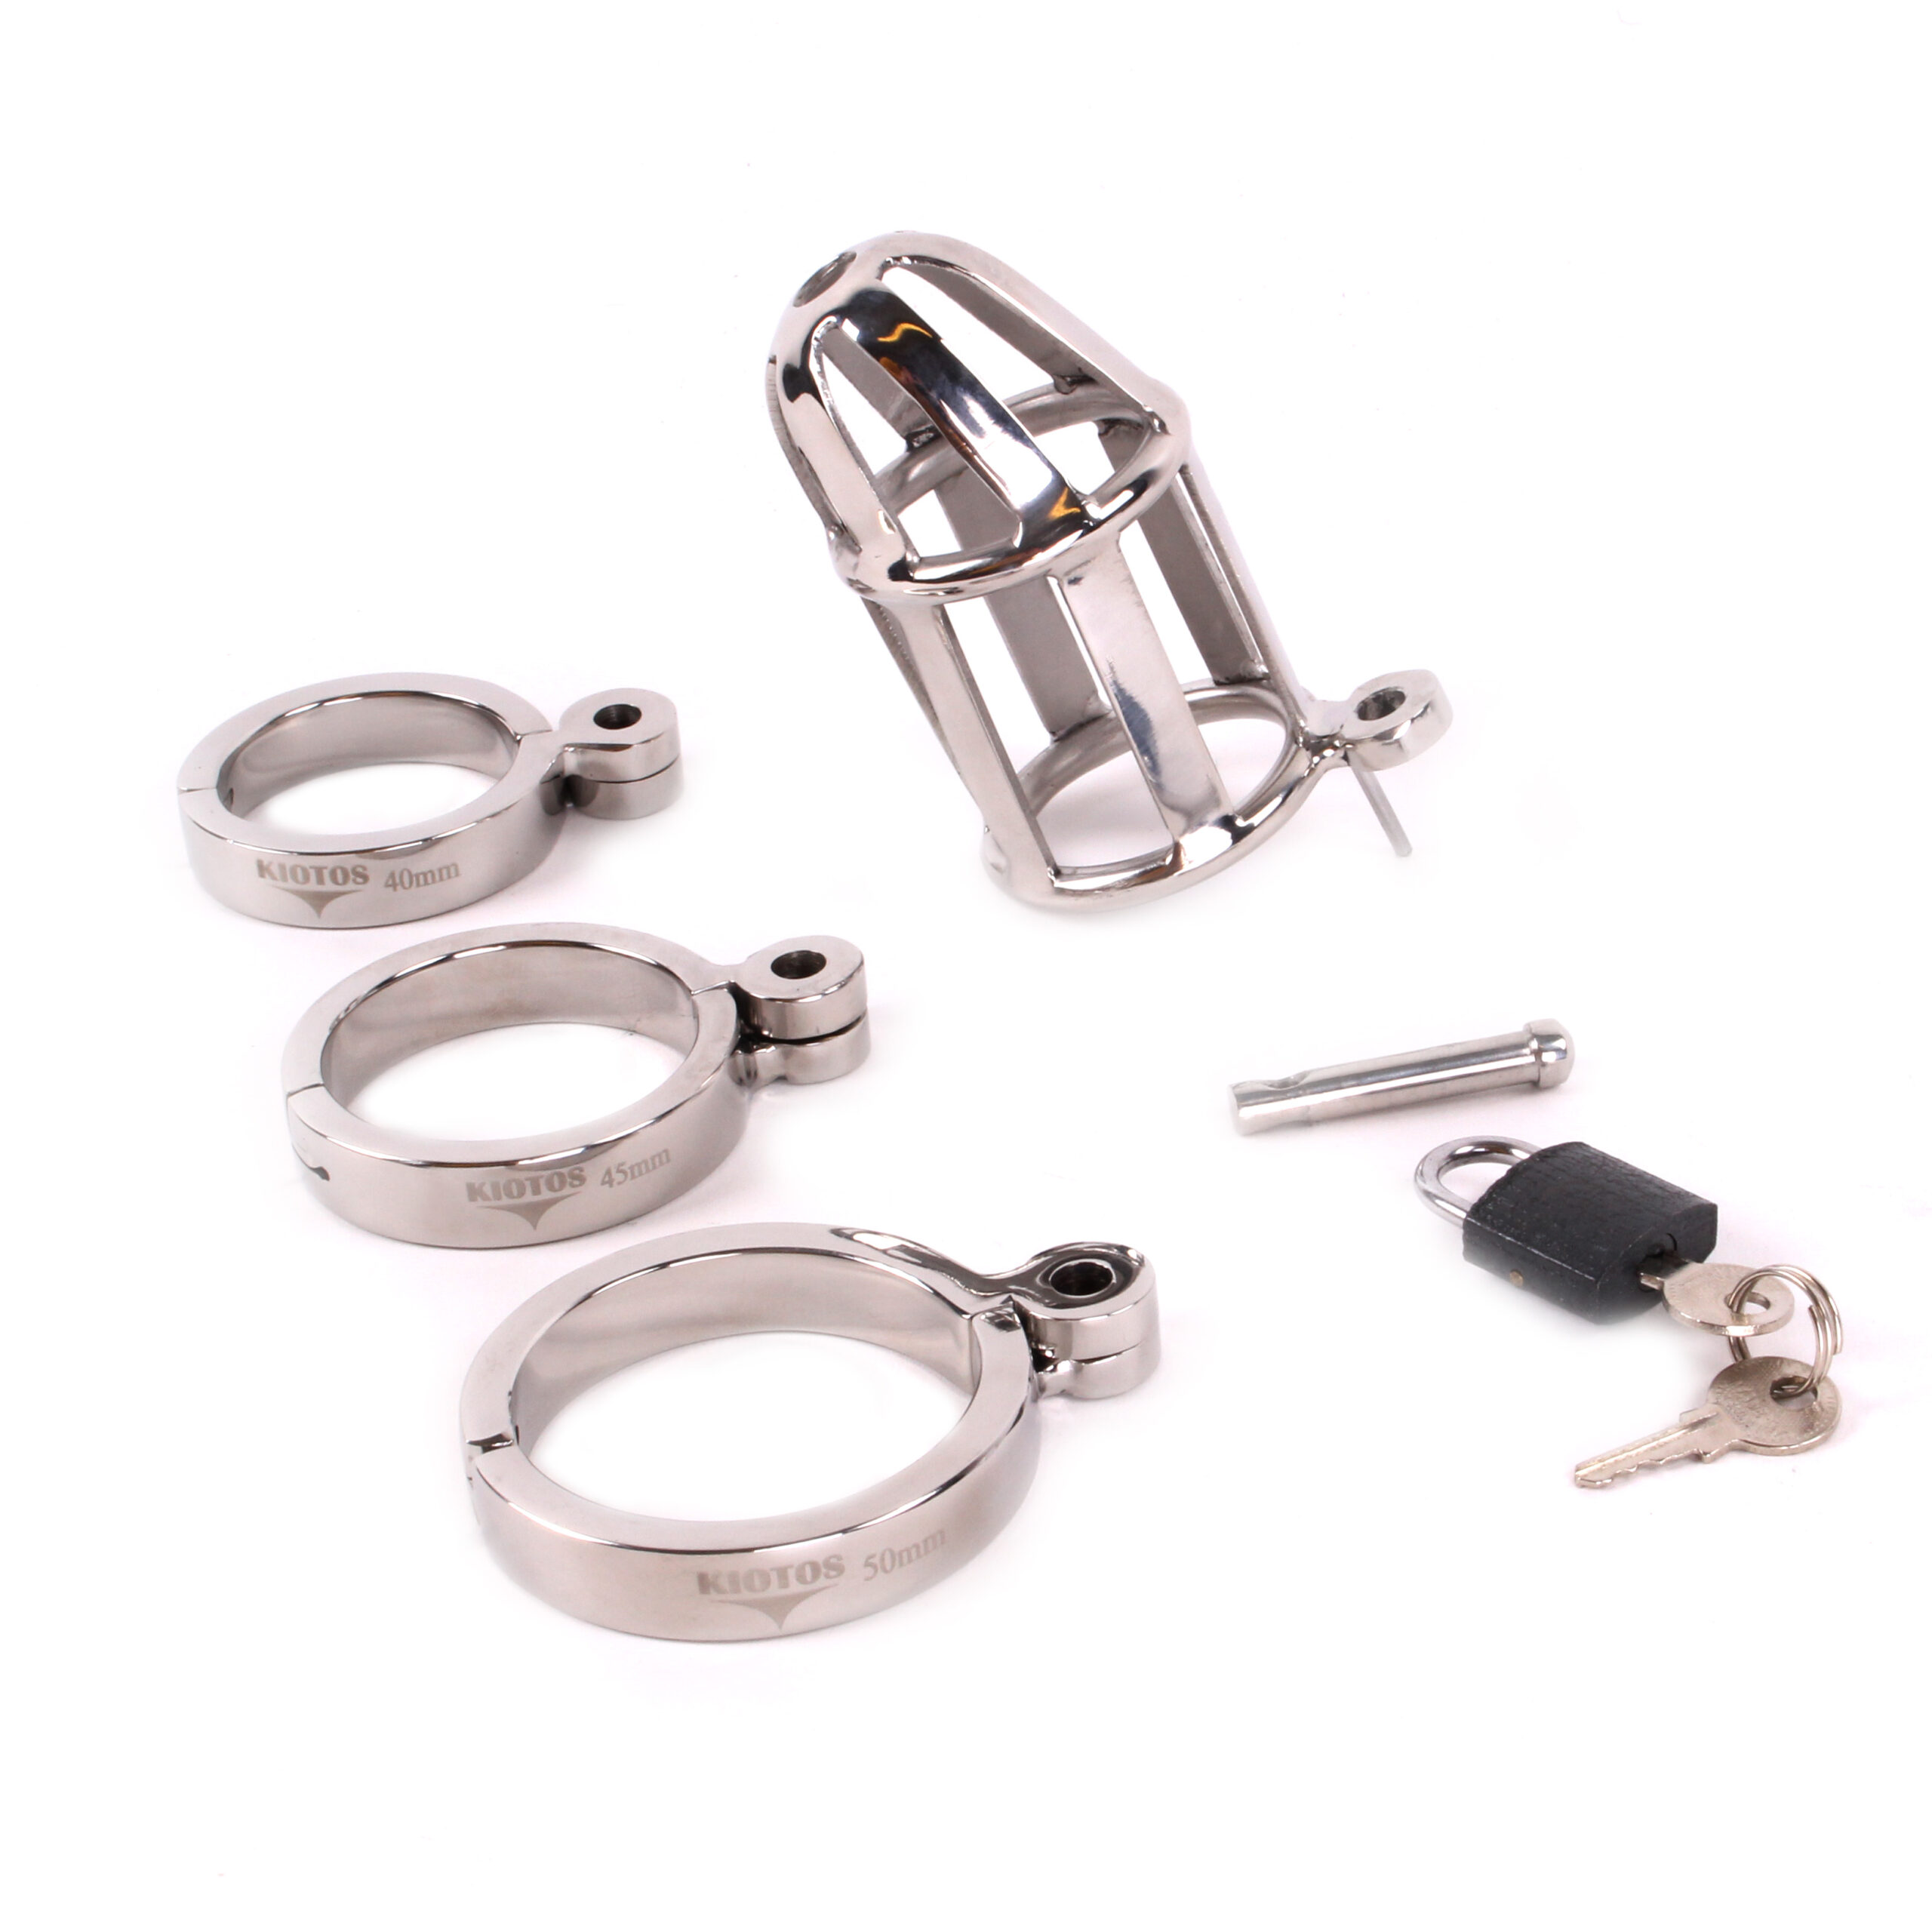 Chastity-Cage-DeLuxe-8-cm-OPR-277024-4